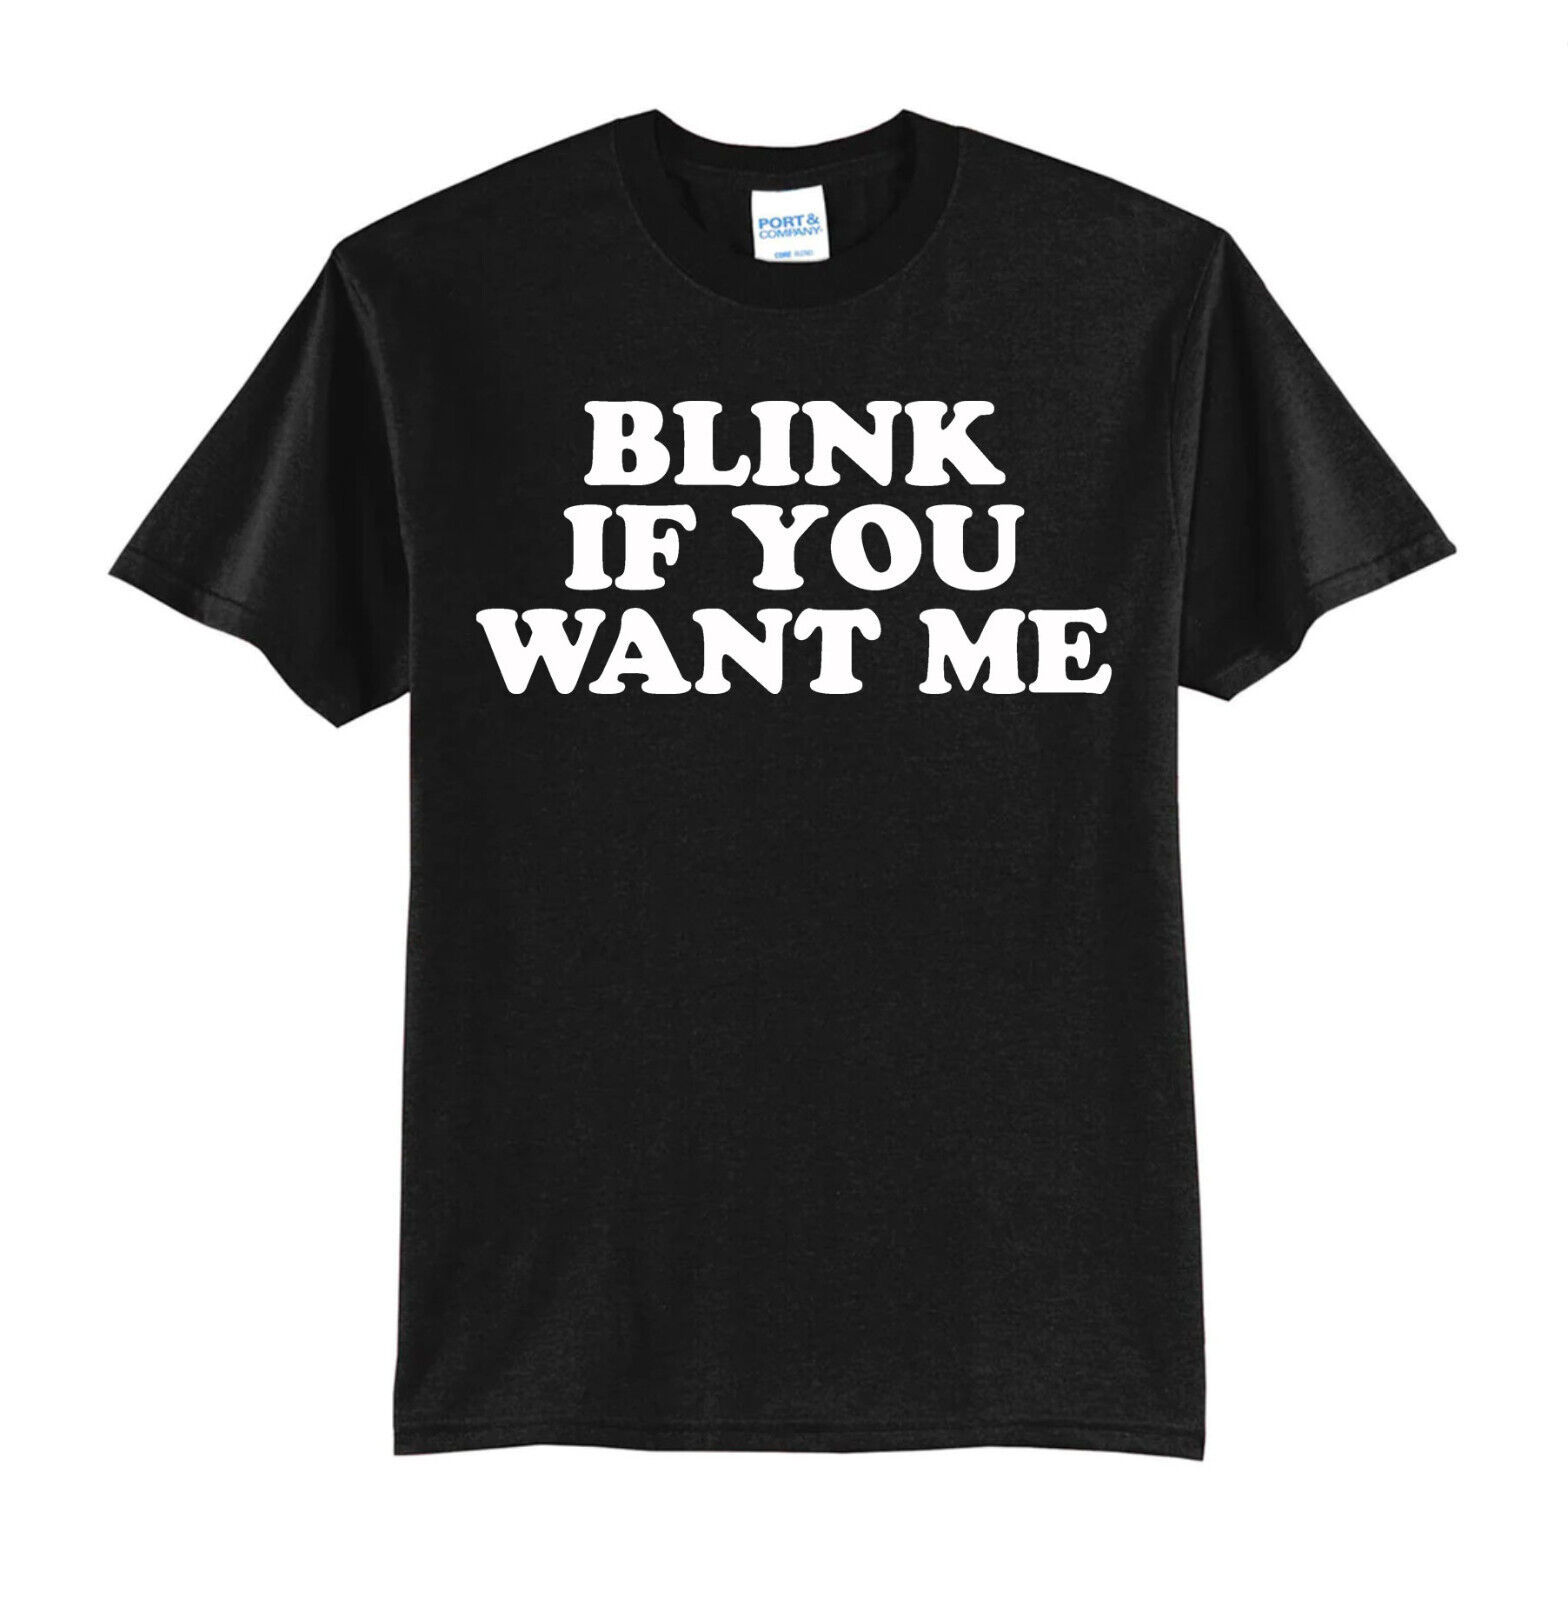 Primary image for BLINK IF YOU WANT ME-NEW T-SHIRT FUNNY-S-M-L-XL